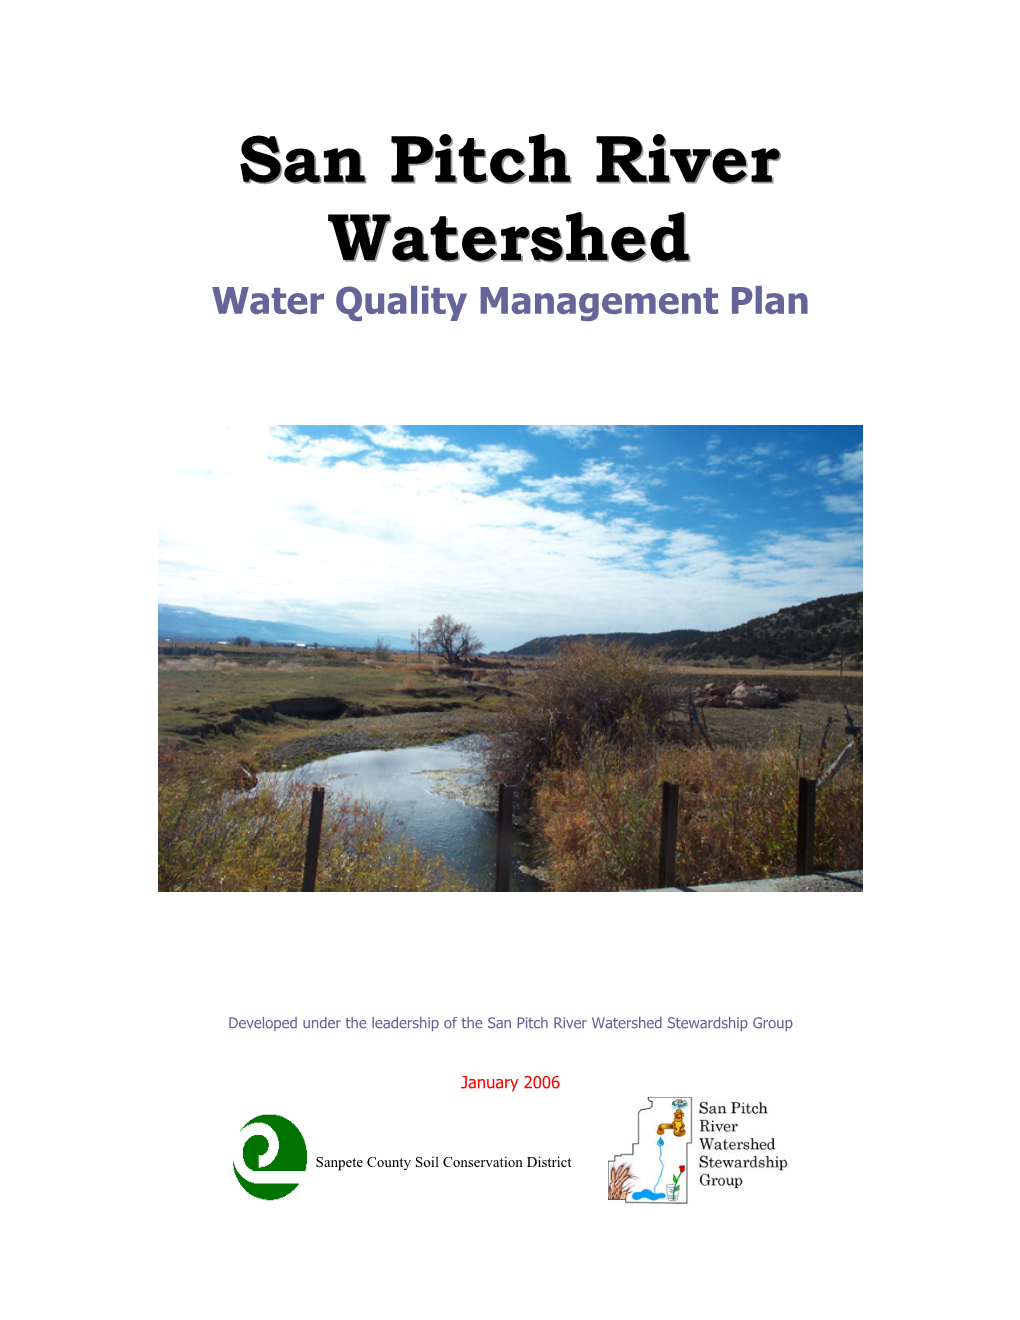 San Pitch River Watershed Water Quality Management Plan